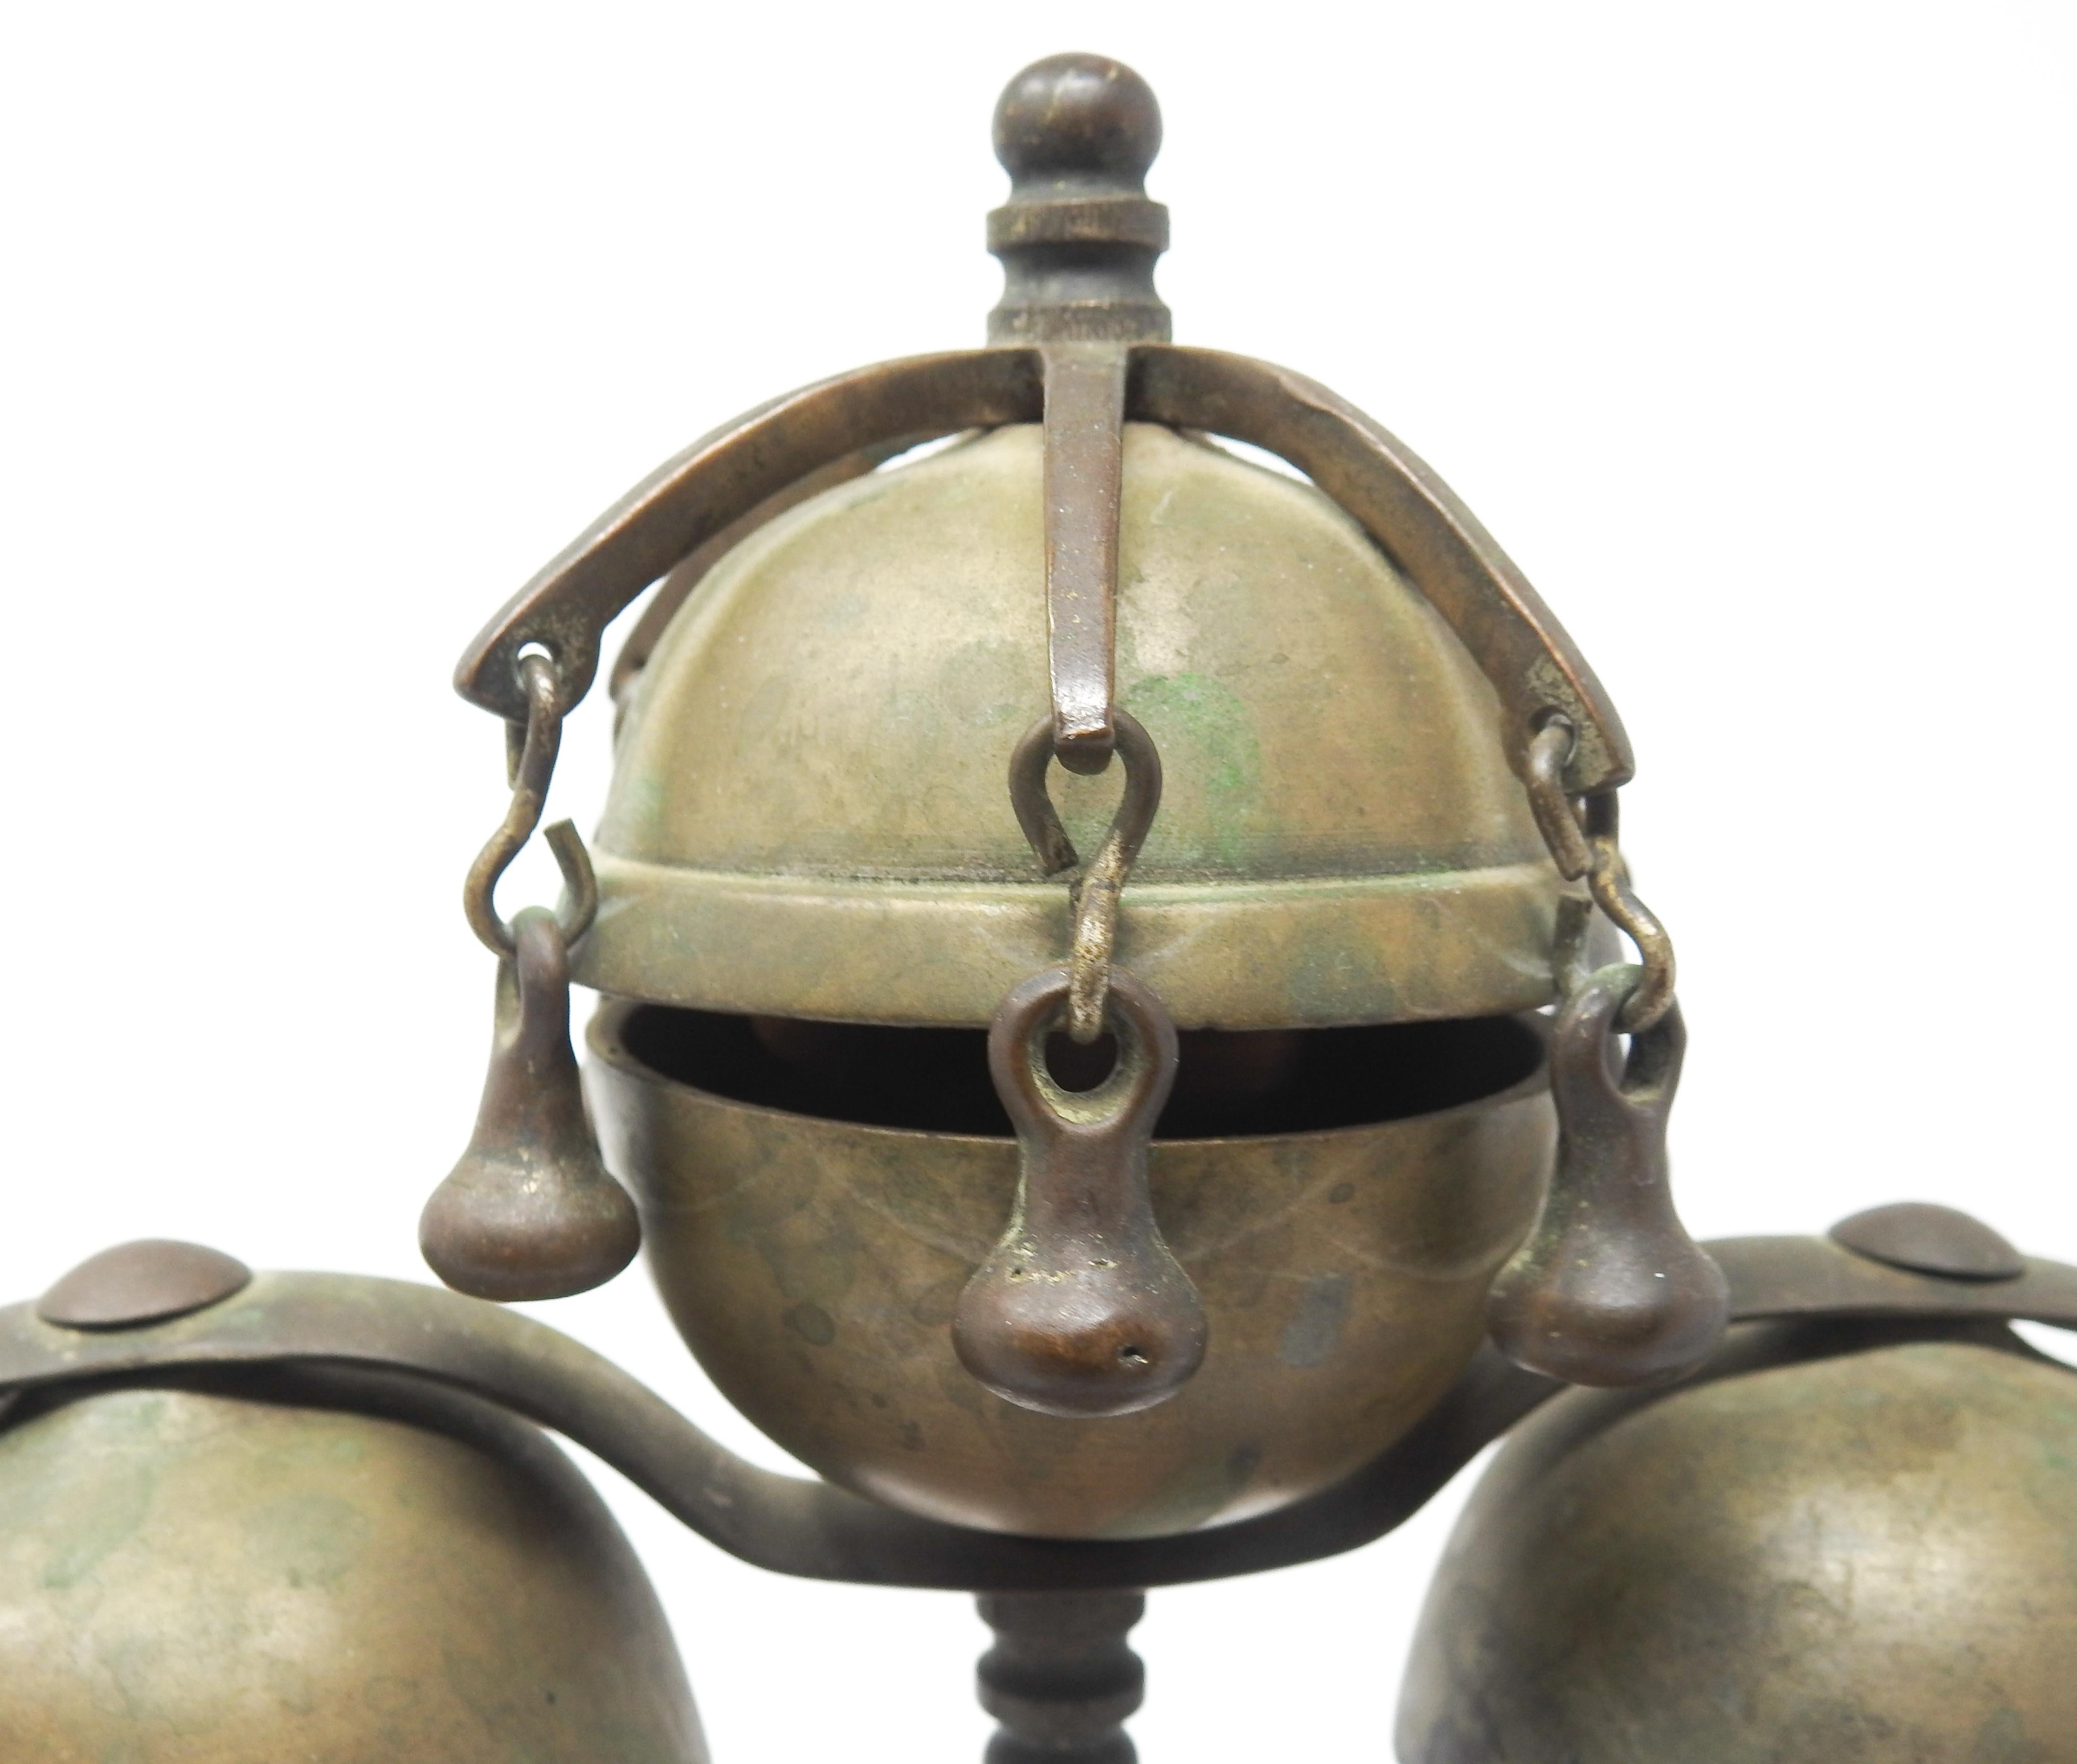 Offering these gorgeous bronze and brass meditation bells on wood stand from the late 19th Century. Starting on a handcrafted wood base that is very geometric. The curved arms holding the bells rise gracefully and meet in the middle. There are two